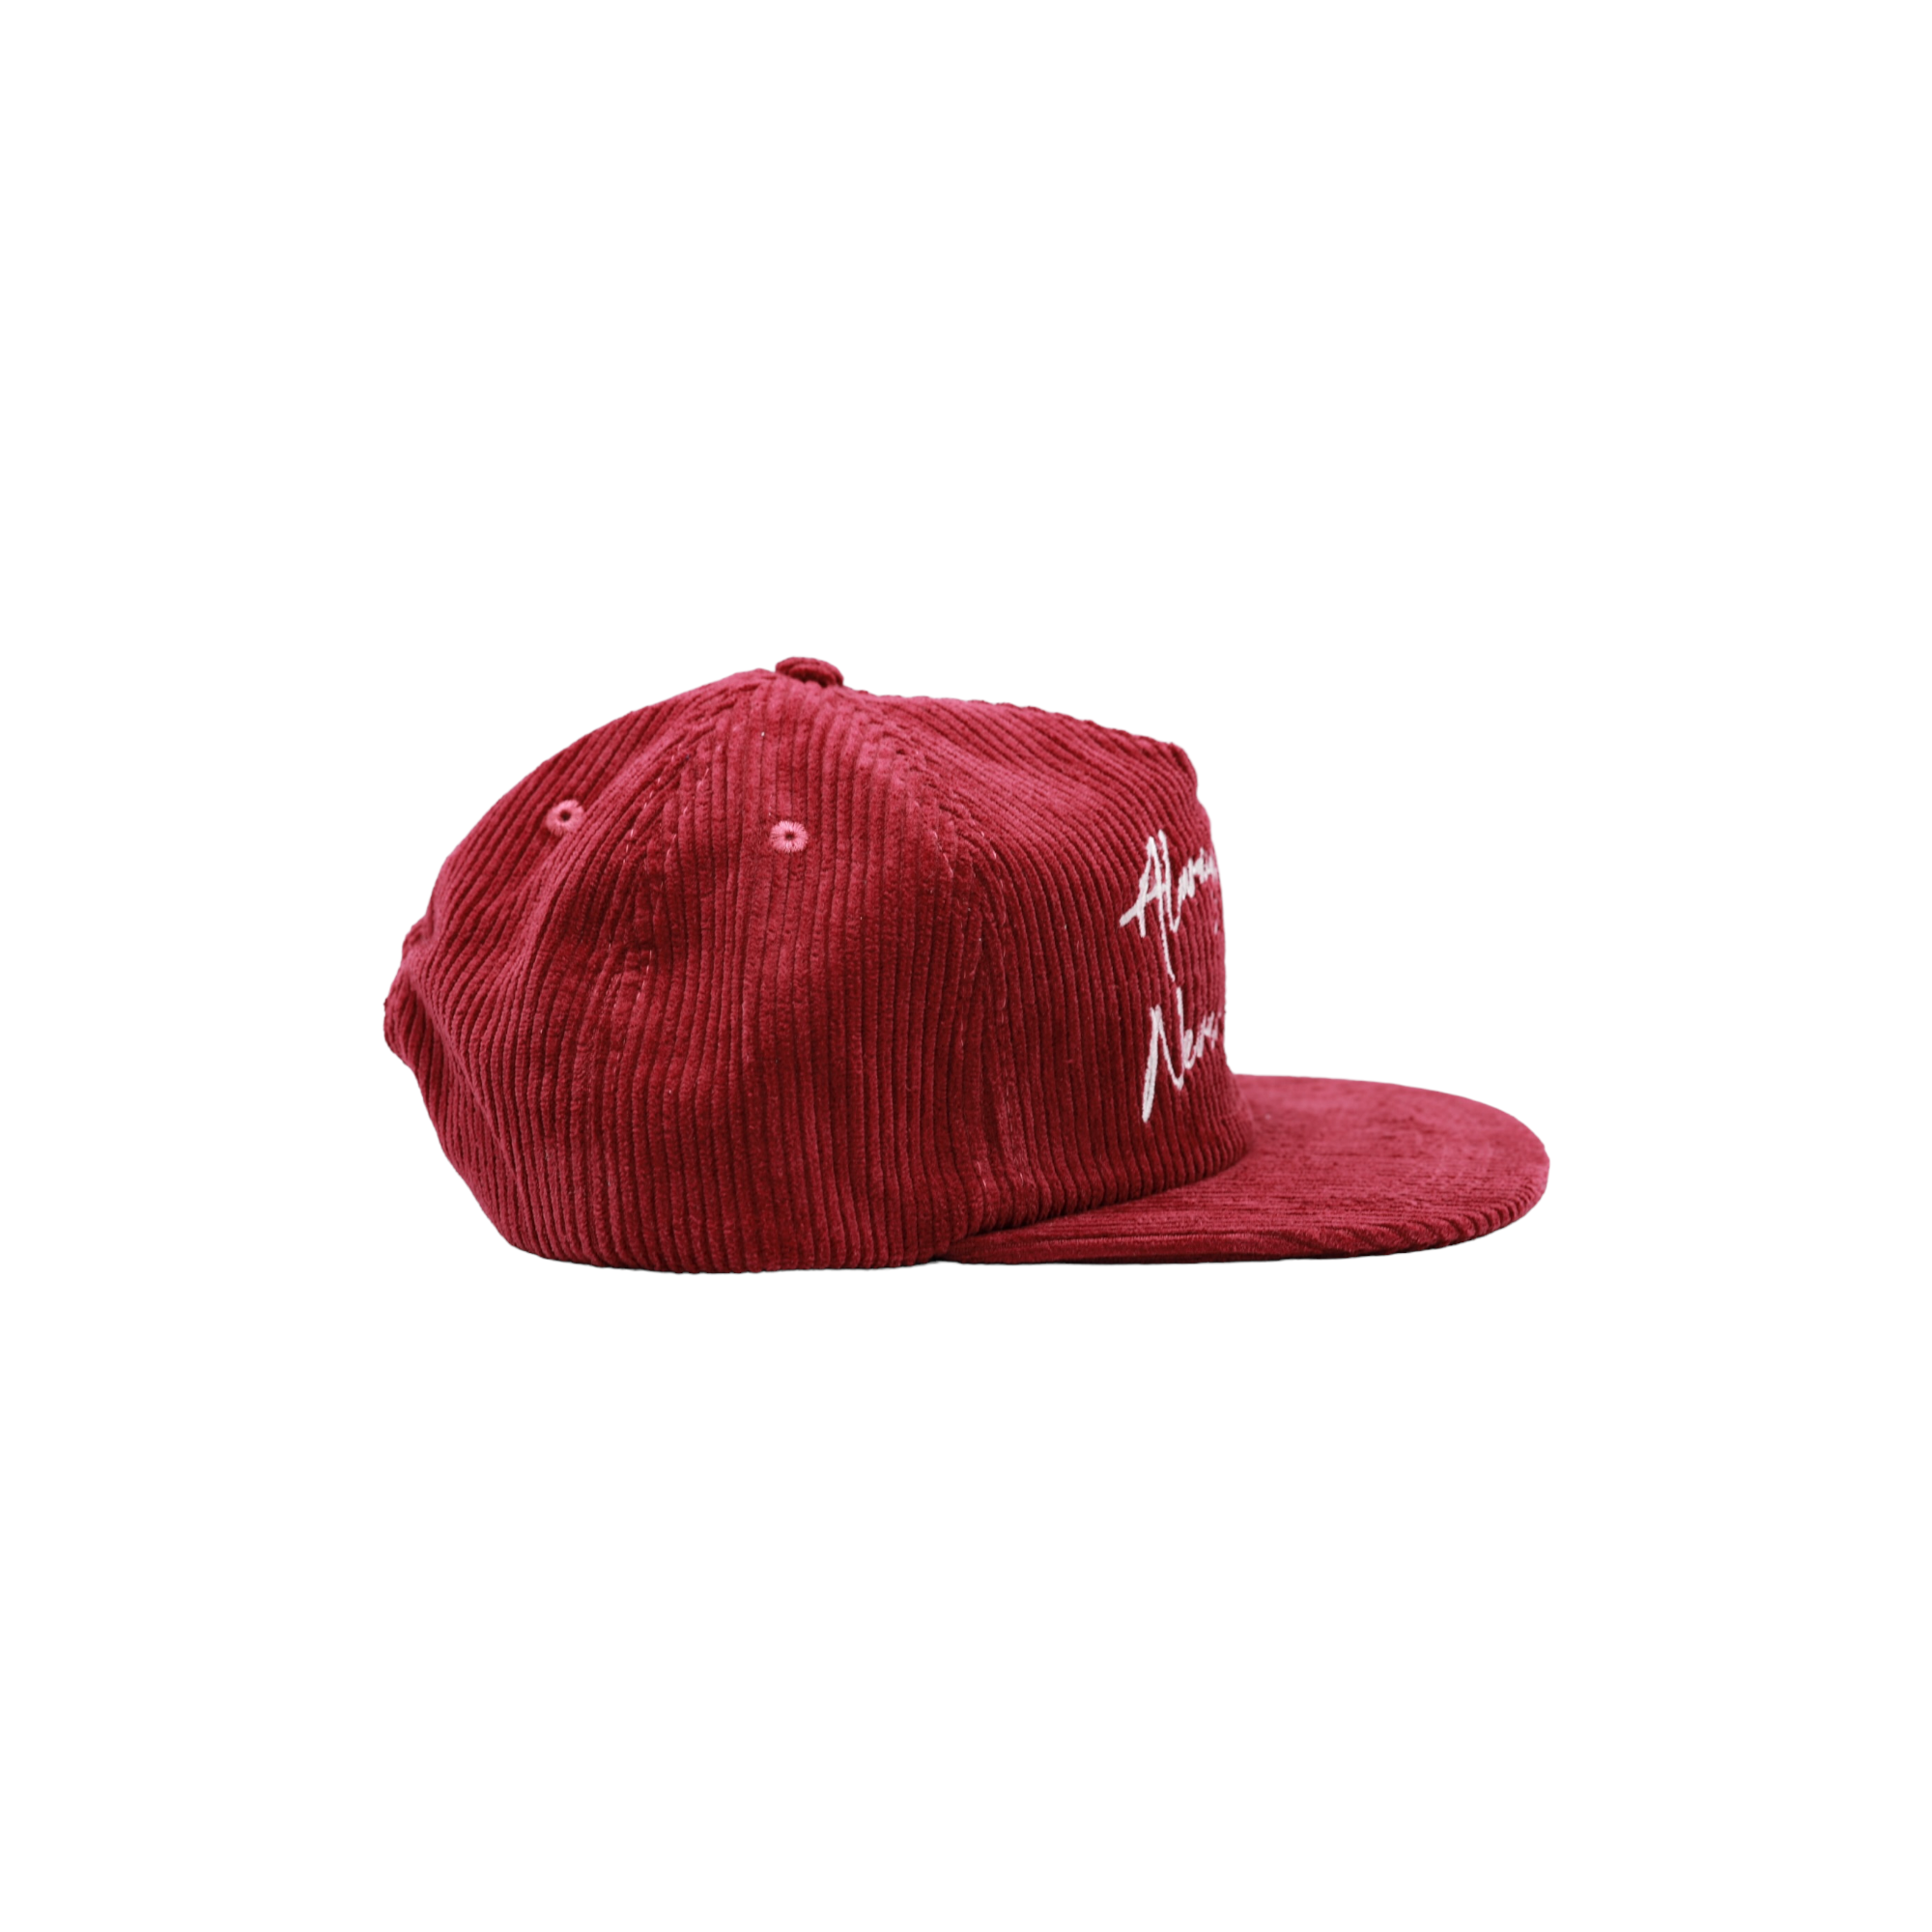 Always Us, – Burgundy Never Painters Corduroy Them - PericoLimited Cap